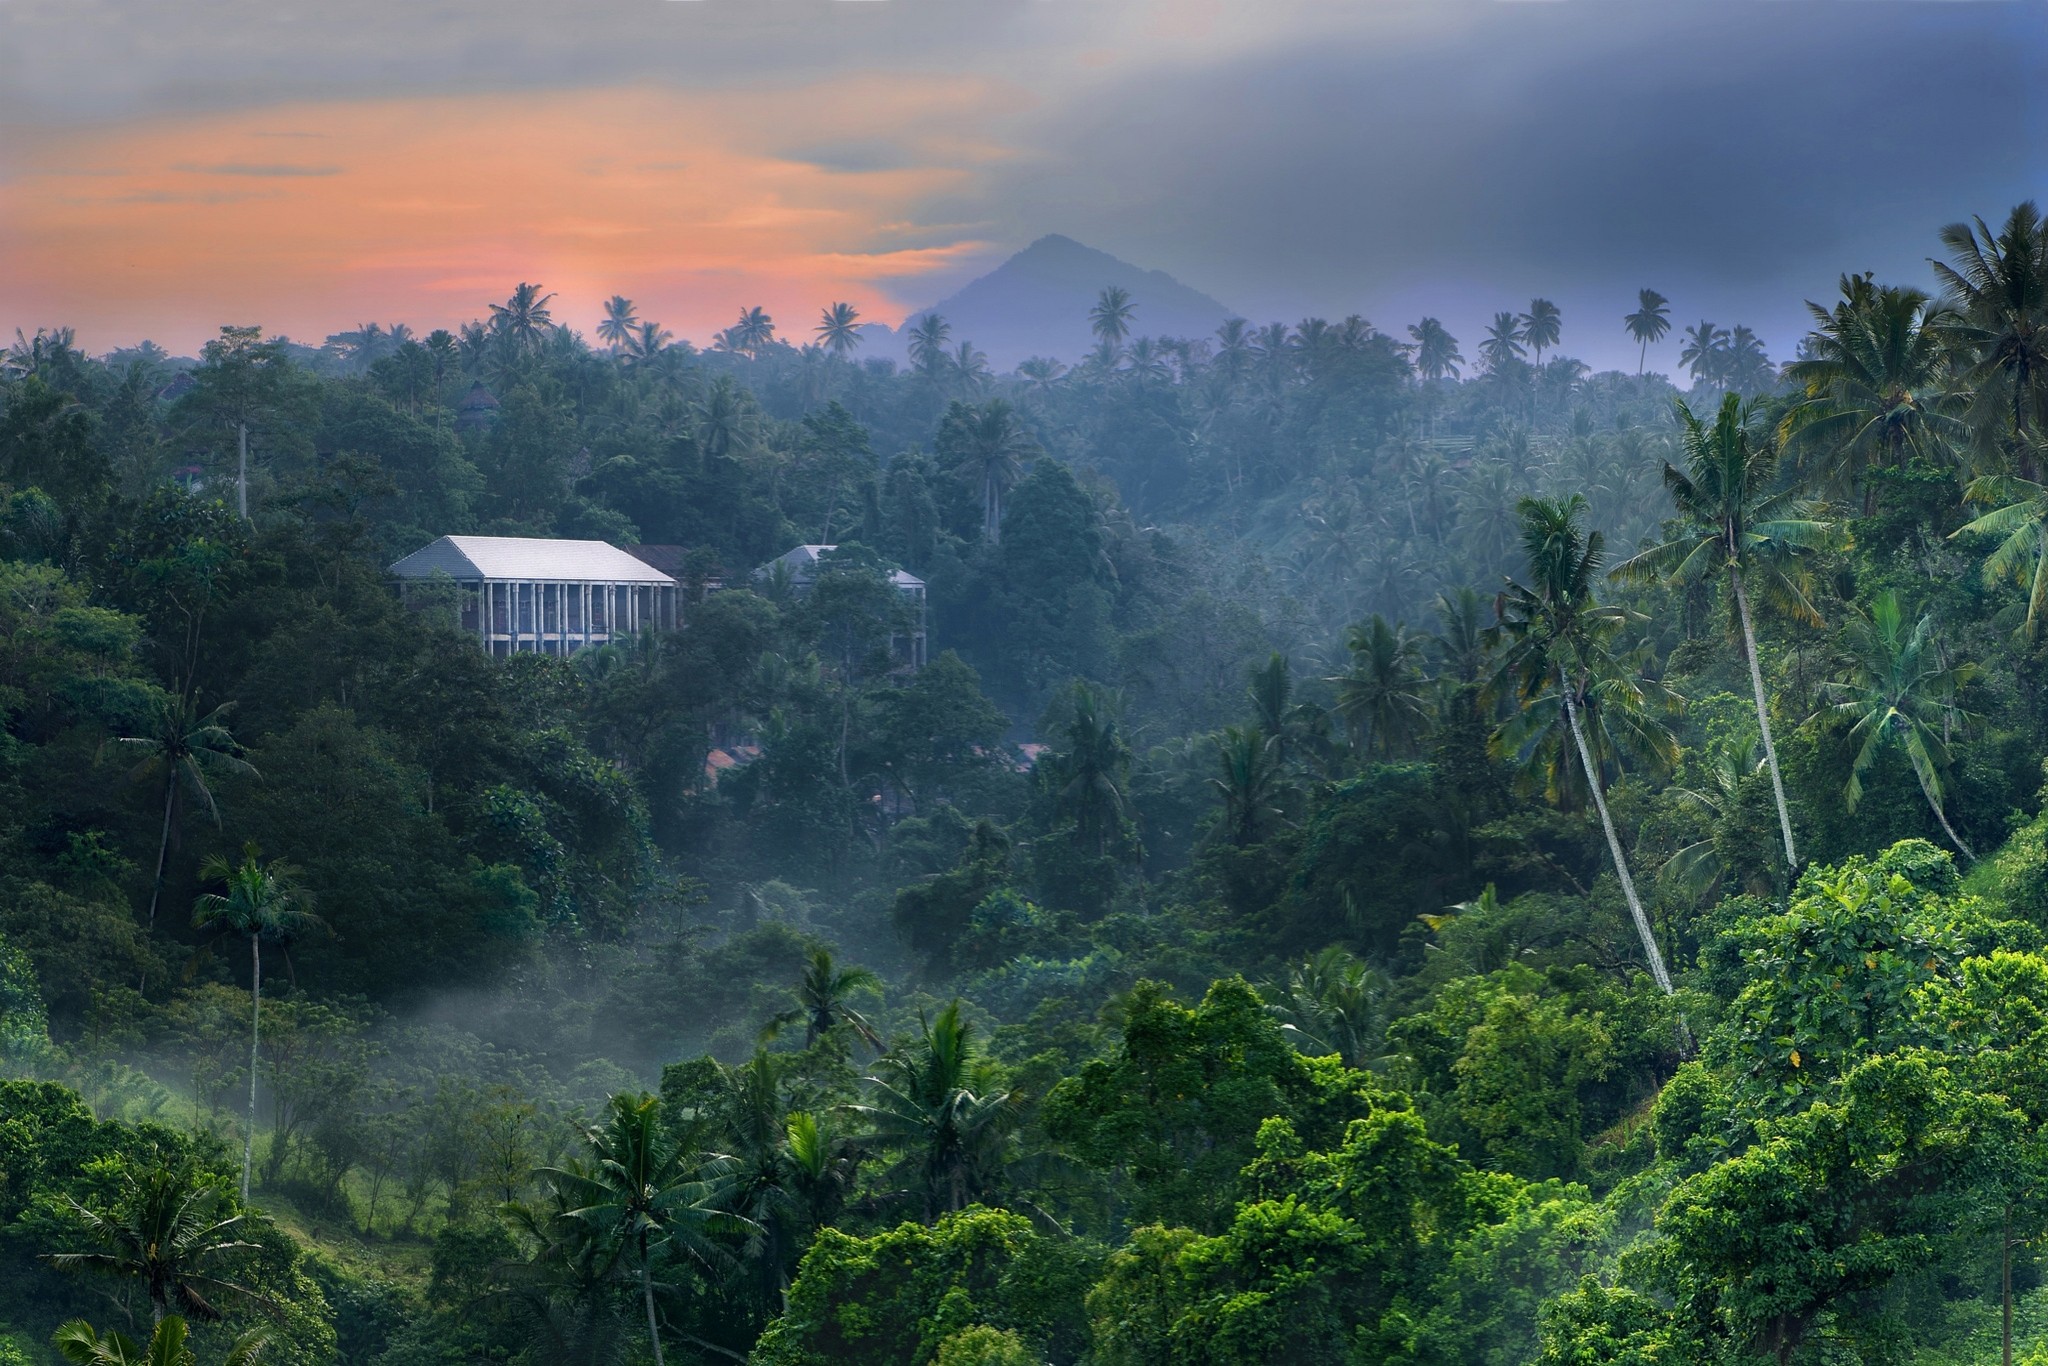 General 2048x1366 nature landscape tropical forest jungle mountains mist palm trees building sky Bali Indonesia Asia